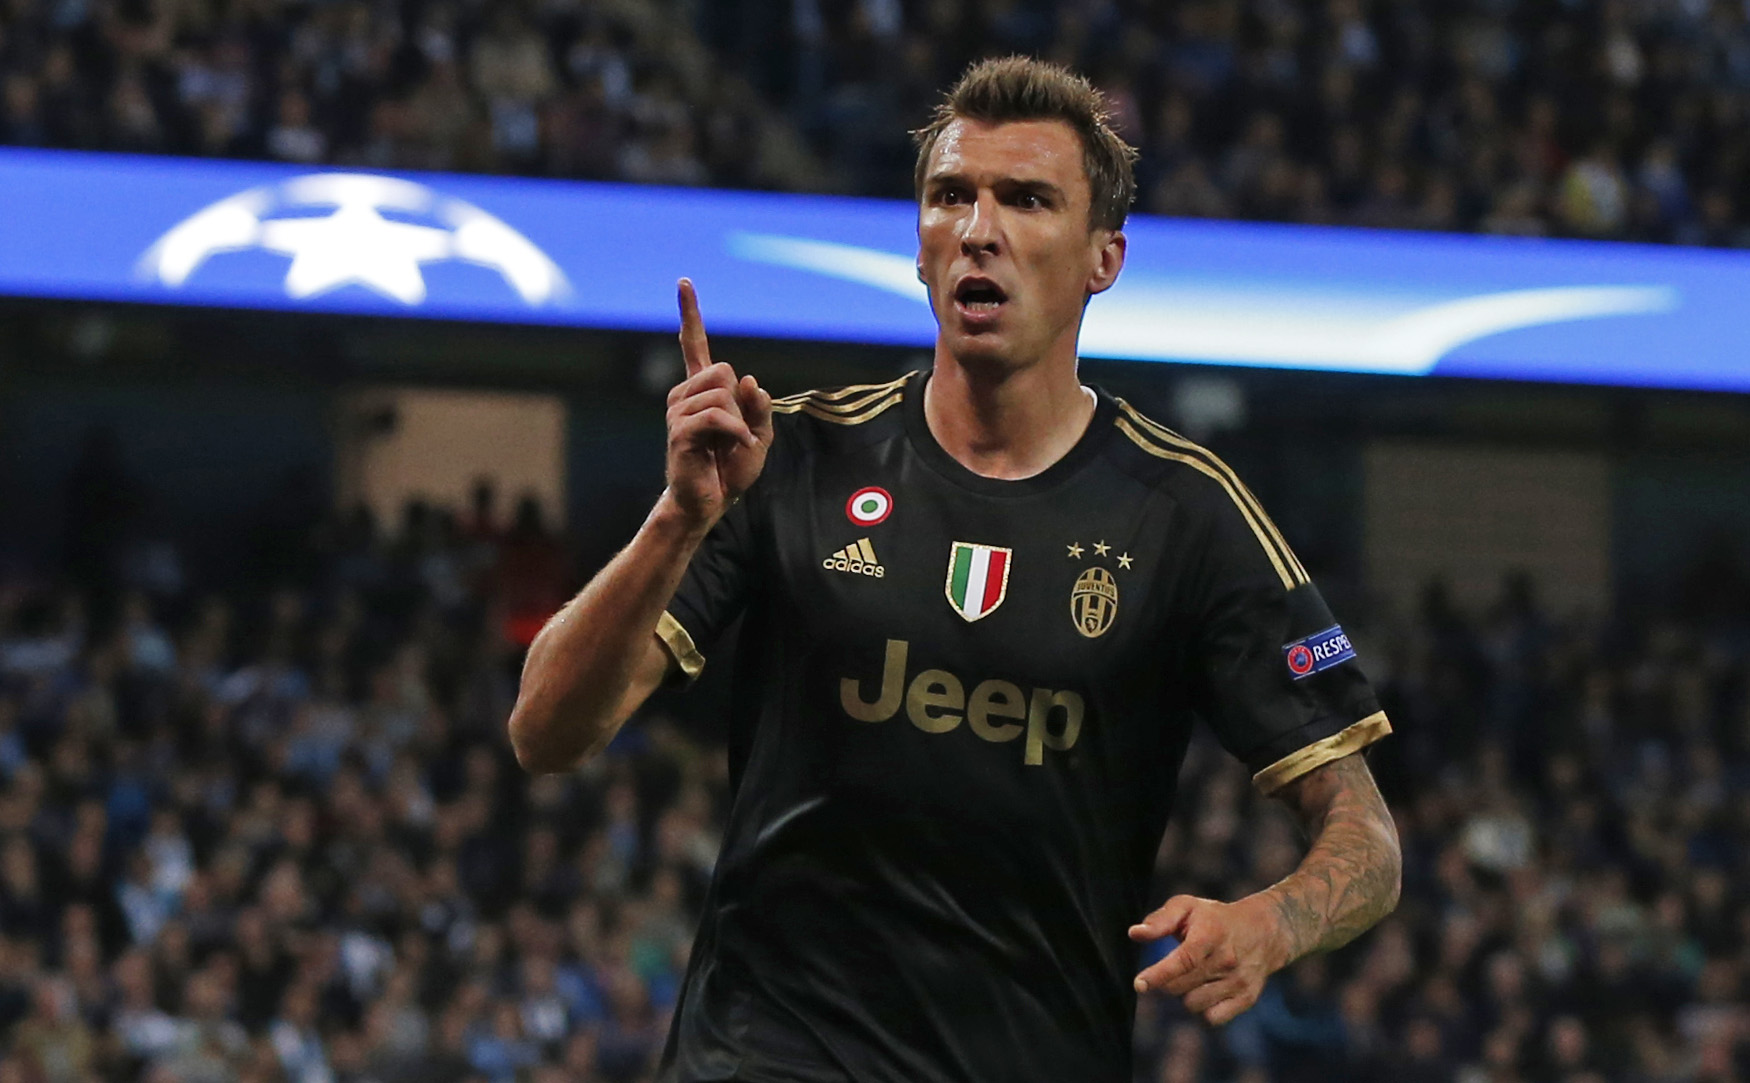 Football - Manchester City v Juventus - UEFA Champions League Group Stage - Group D - Etihad Stadium, Manchester, England - 15/9/15nMario Mandzukic celebrates after scoring the first goal for JuventusnReuters / Phil NoblenLivepicnEDITORIAL USE ONLY.